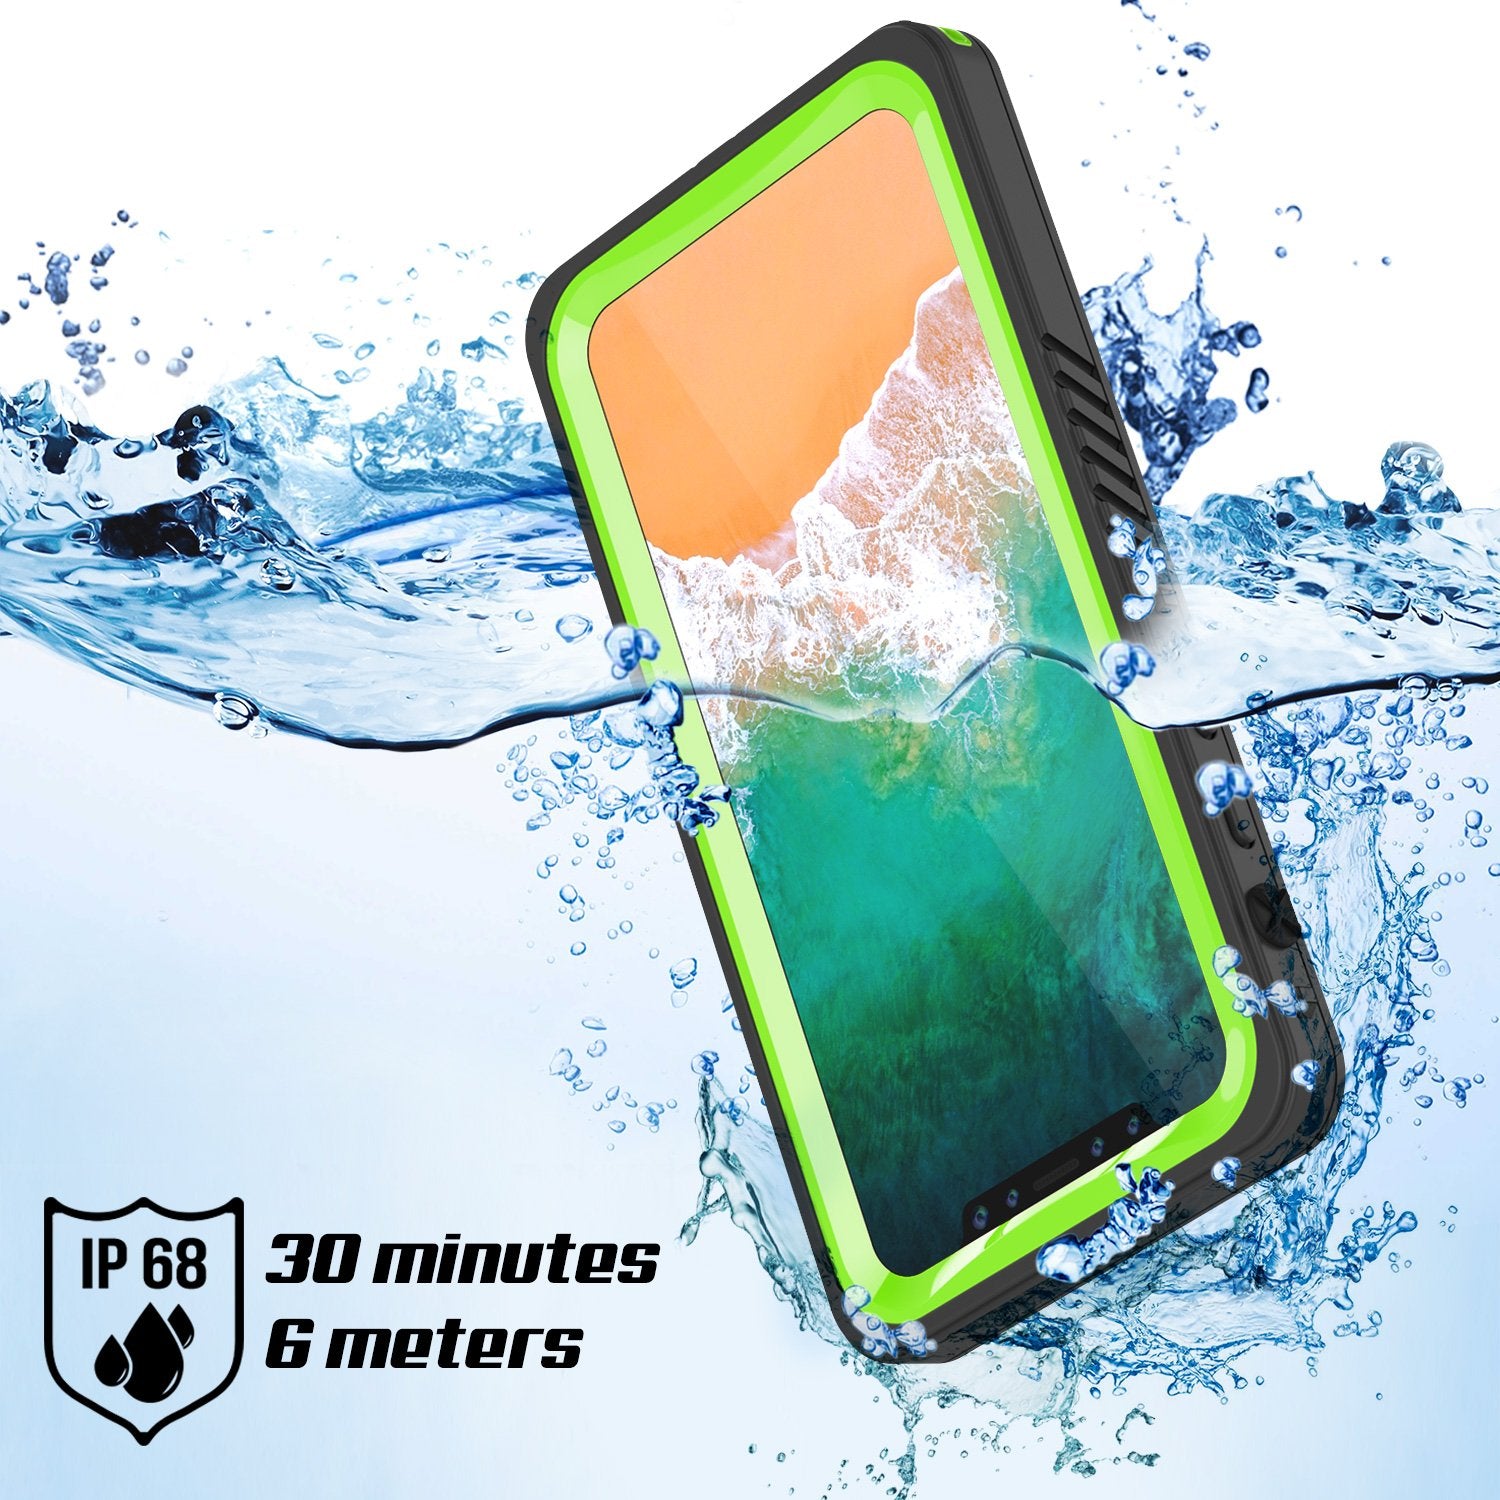 iPhone X Case, Extreme Series Cover W/Screen Protector [Light Green]